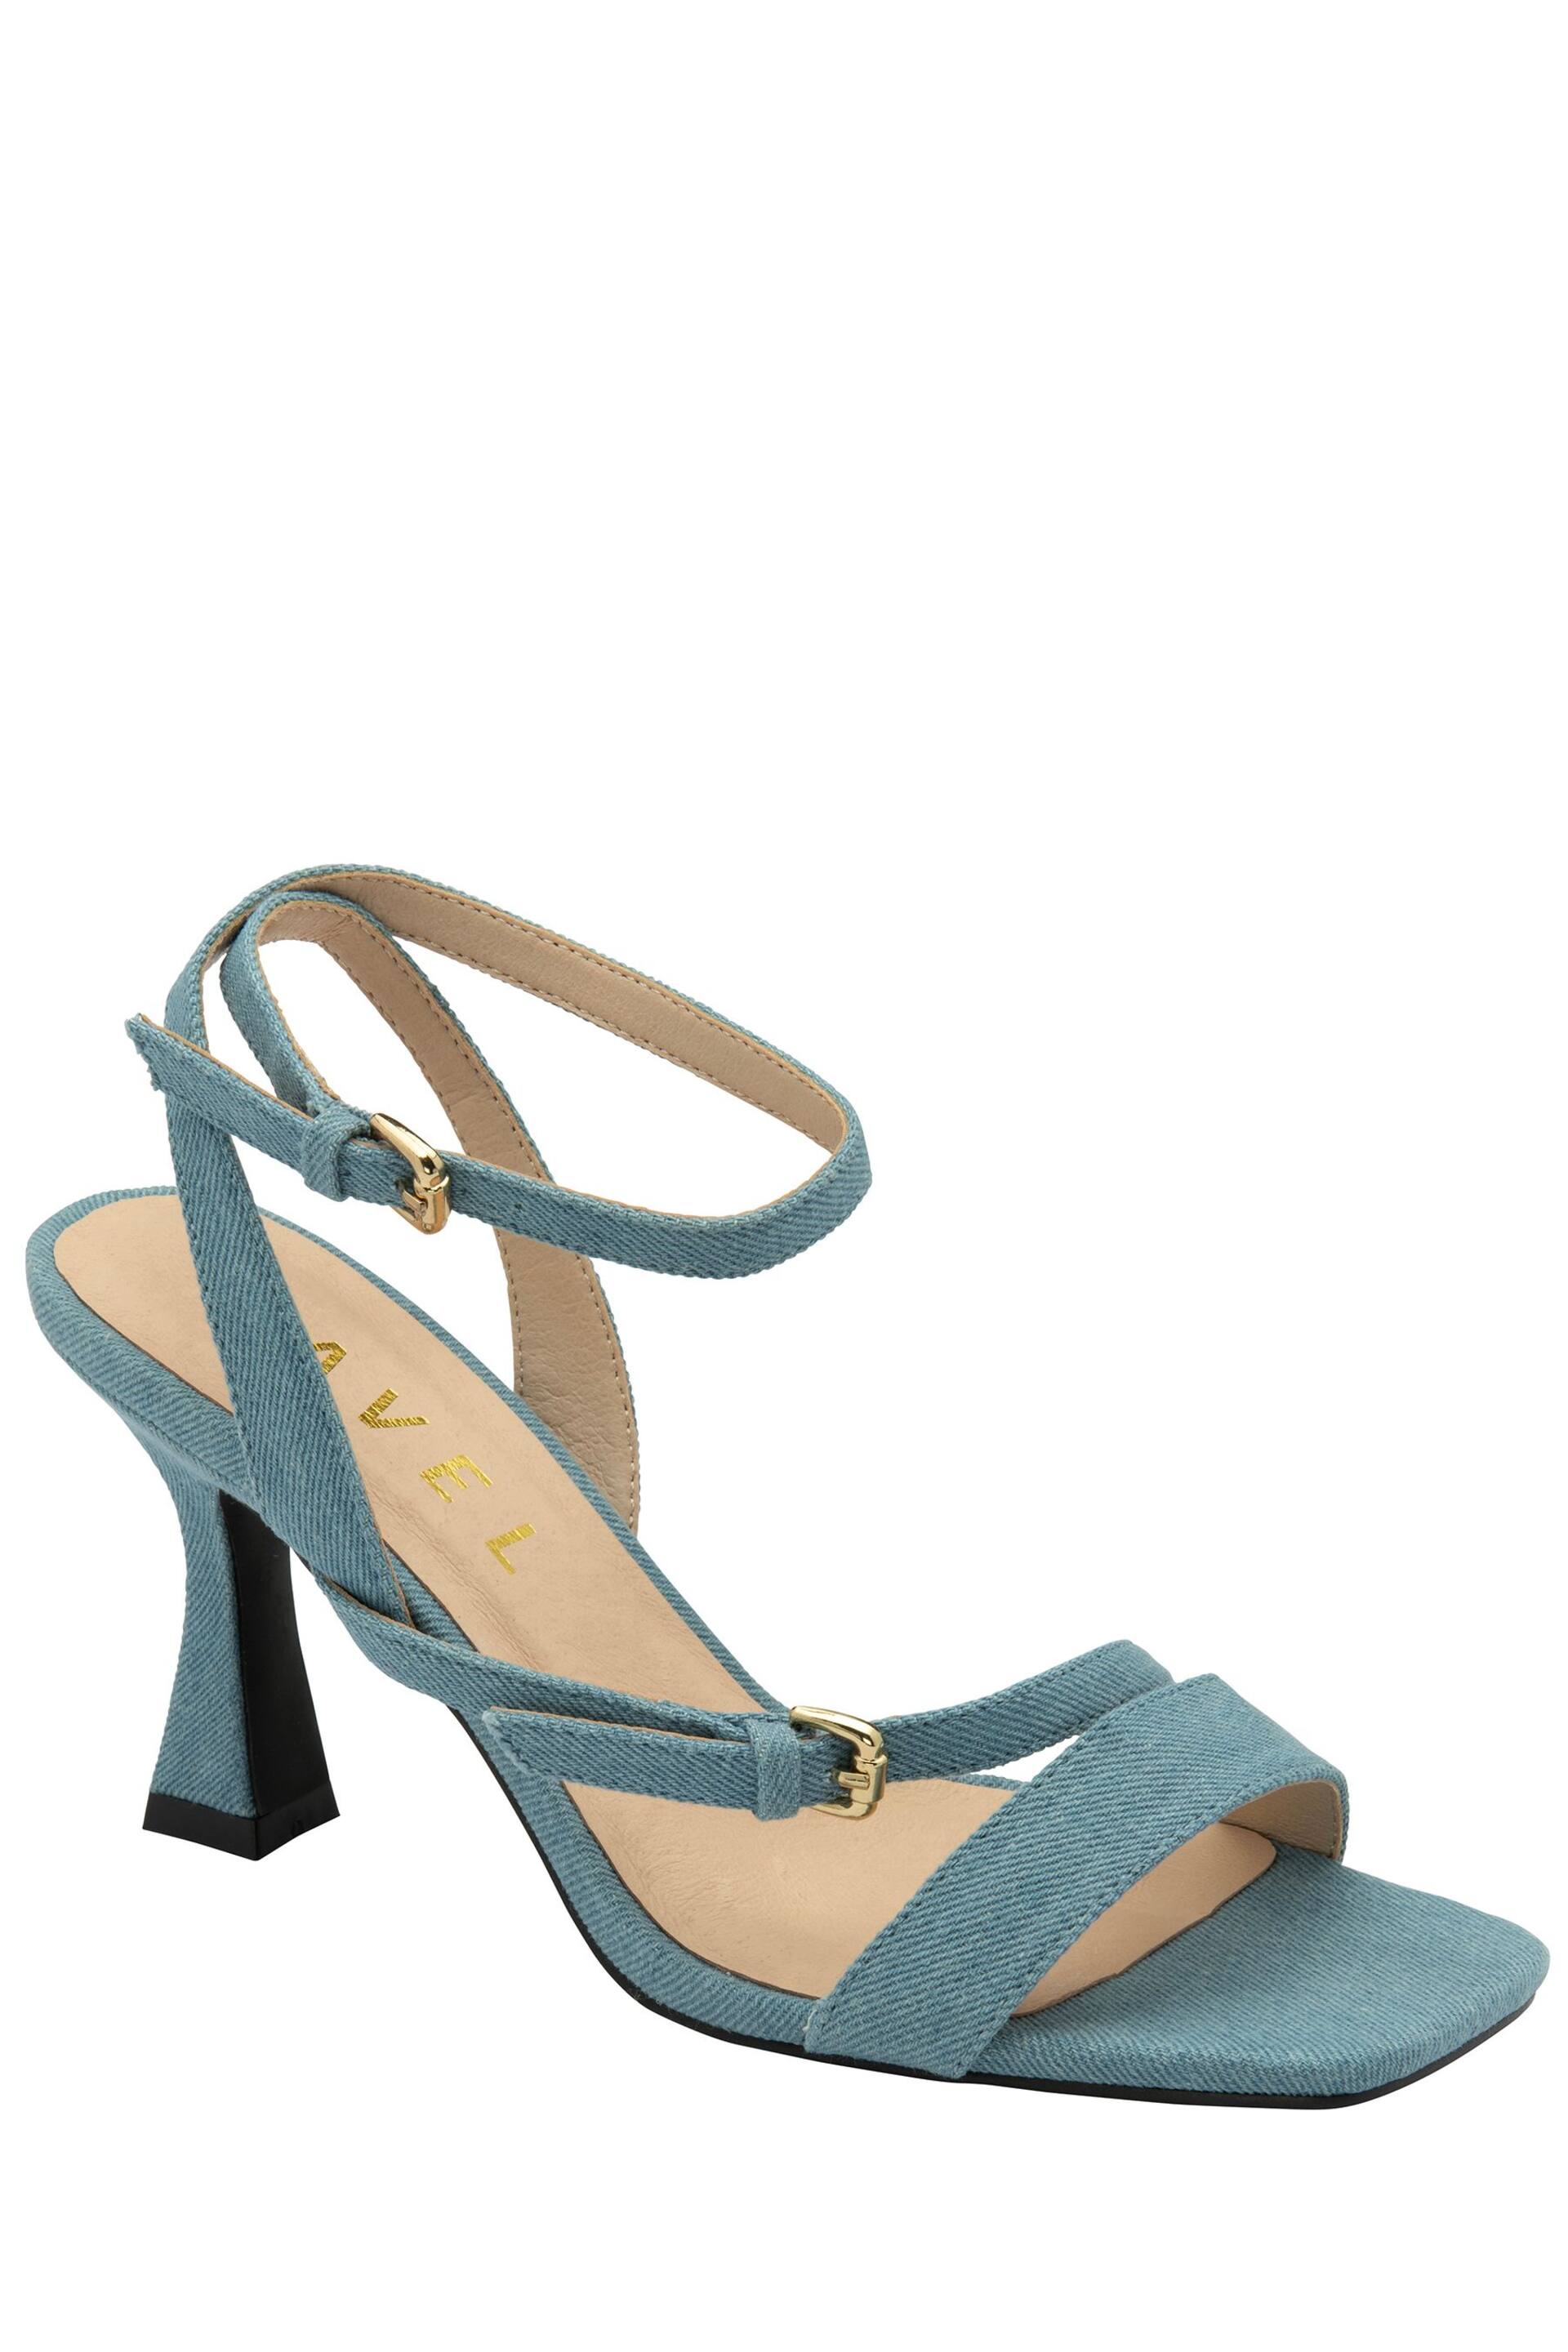 Ravel Blue Open Toe Strappy Sandals - Image 1 of 4